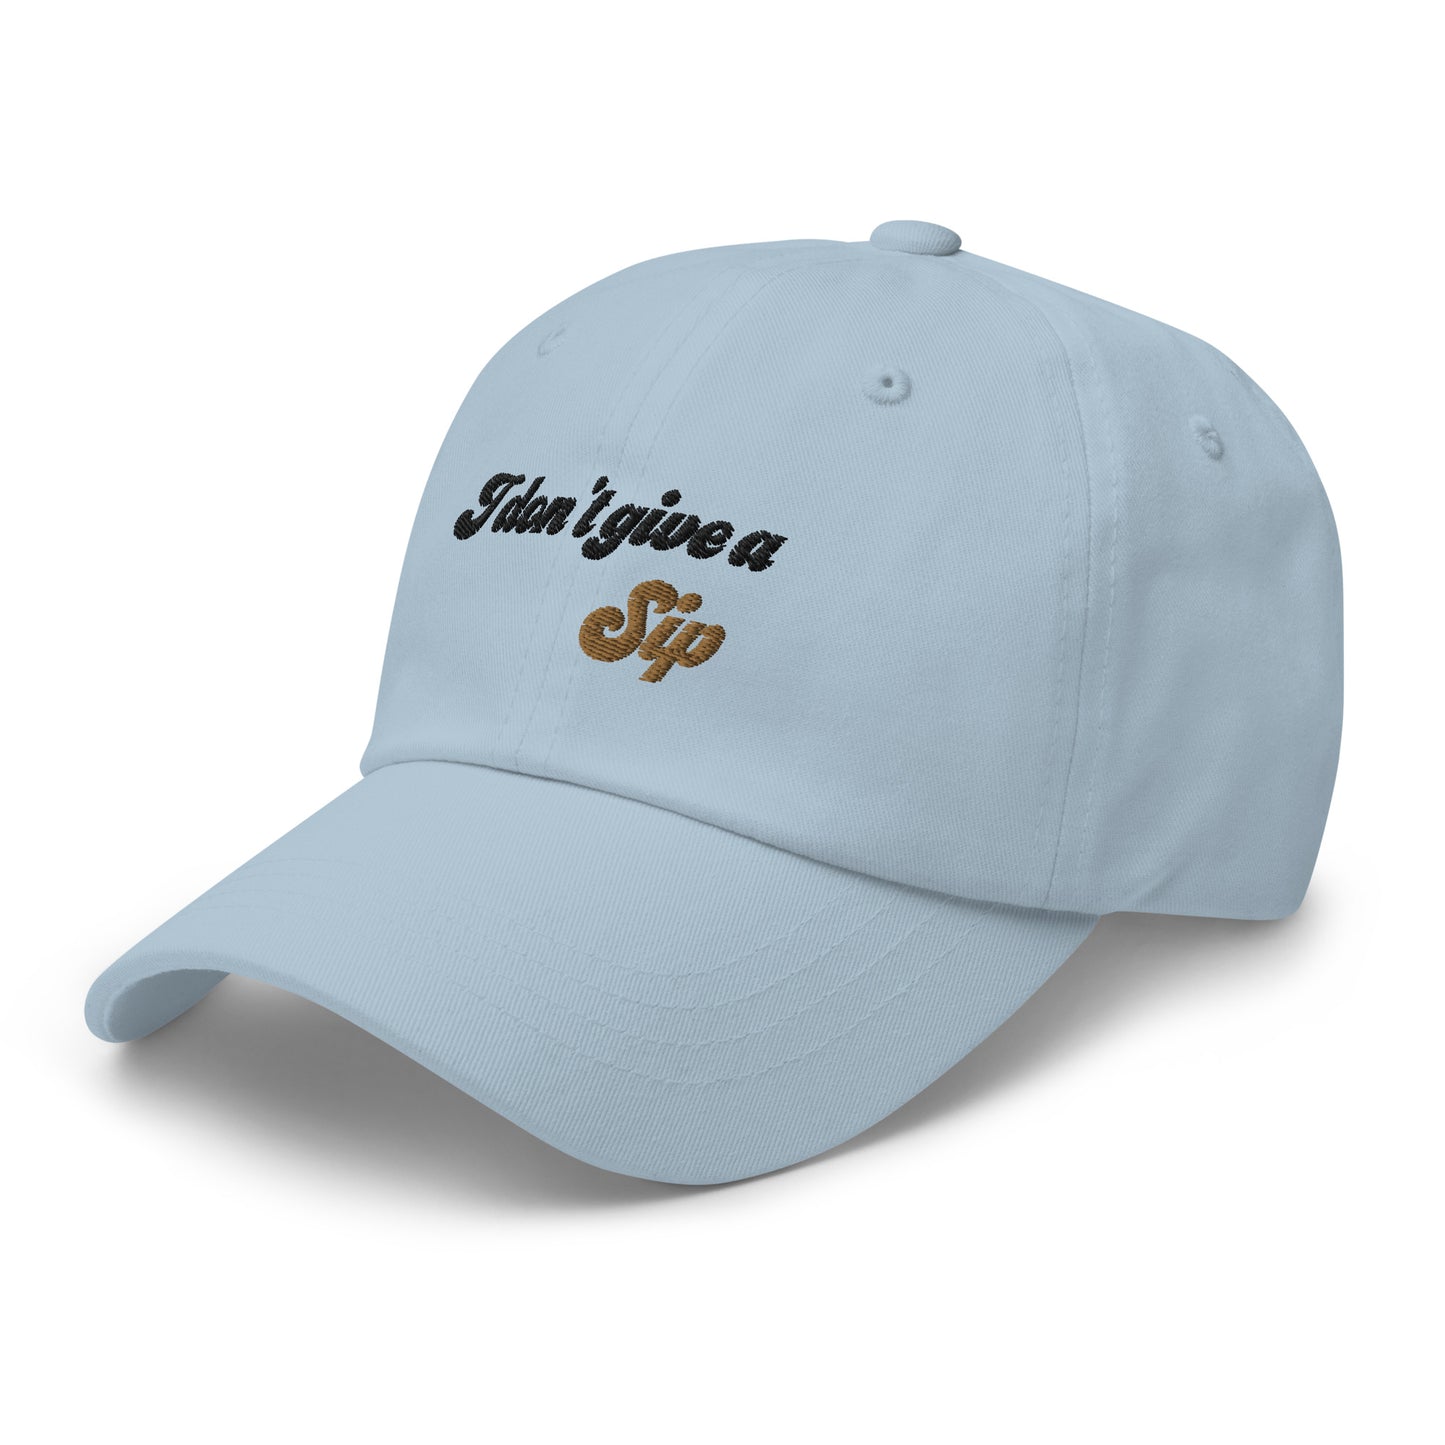 I Don't Give a Sip - Dad Hat